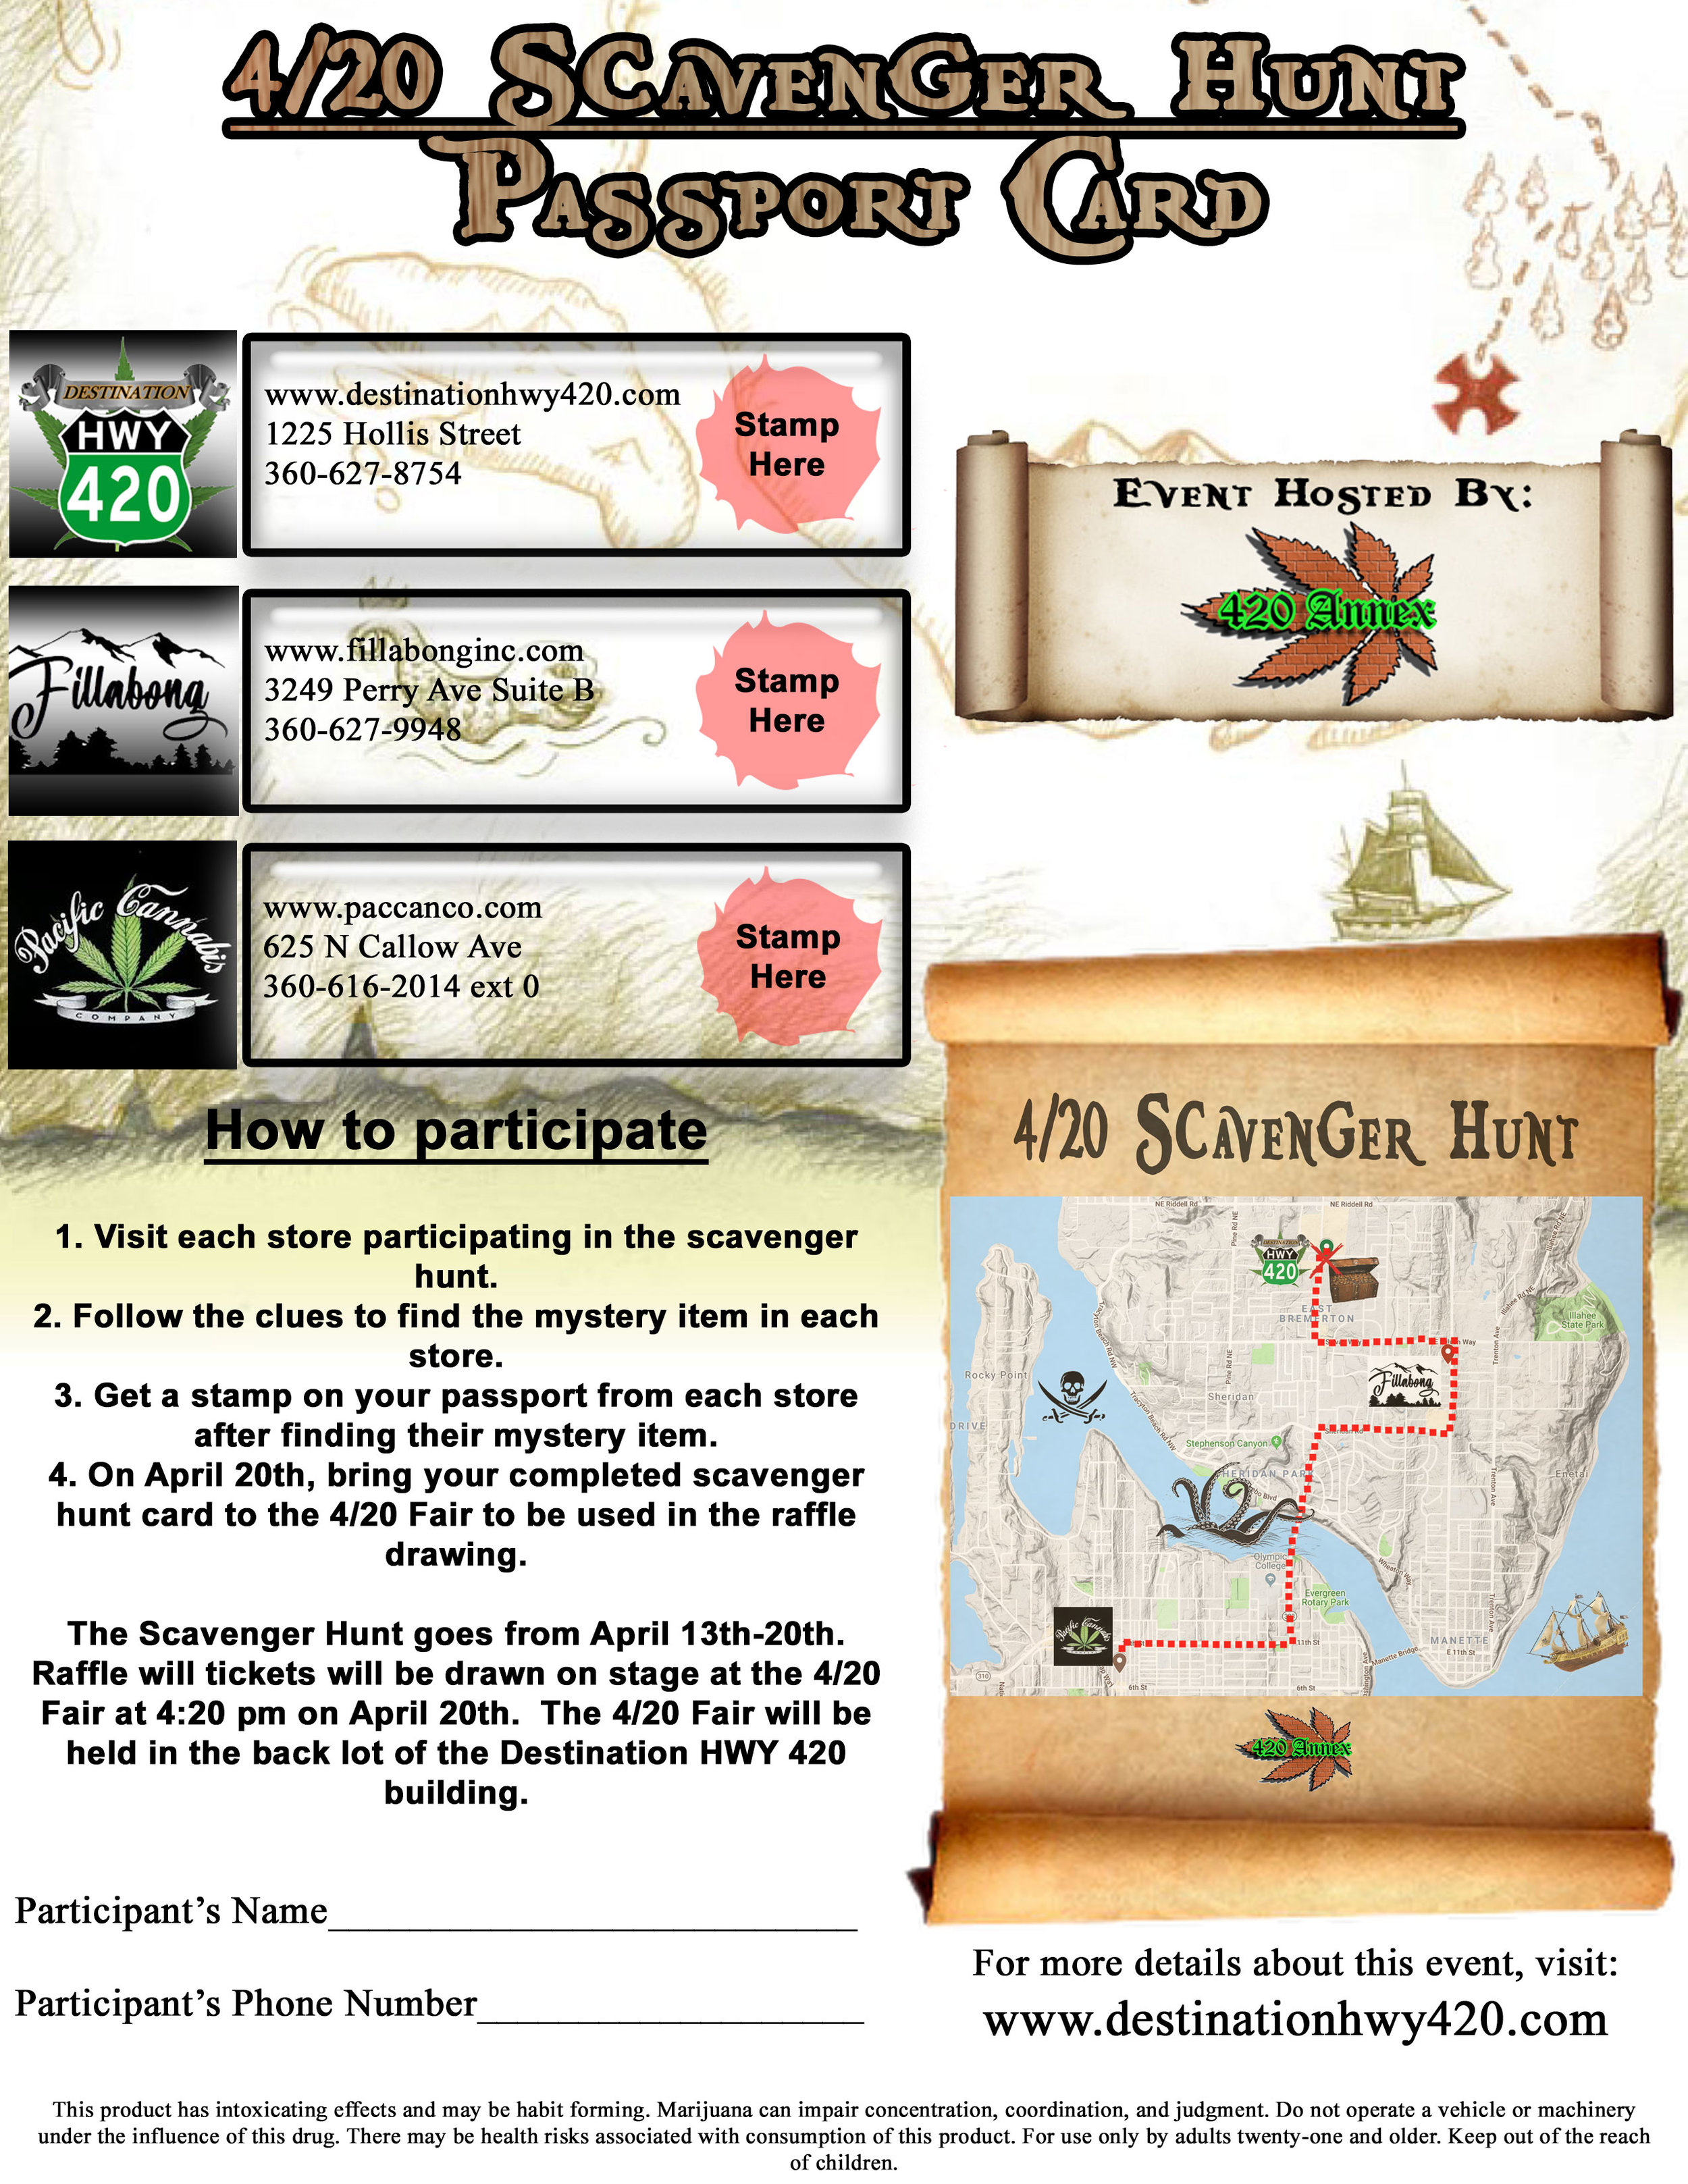 This is the 2019 4/20 Scavenger Hunt Passport Card. Visit Destination HWY 420, Pacific Cannabis Company, and Fillabong Bremerton, solve each stores’ riddle, and find their mystery item, for a chance to win some amazing gift baskets from the 420 Annex!